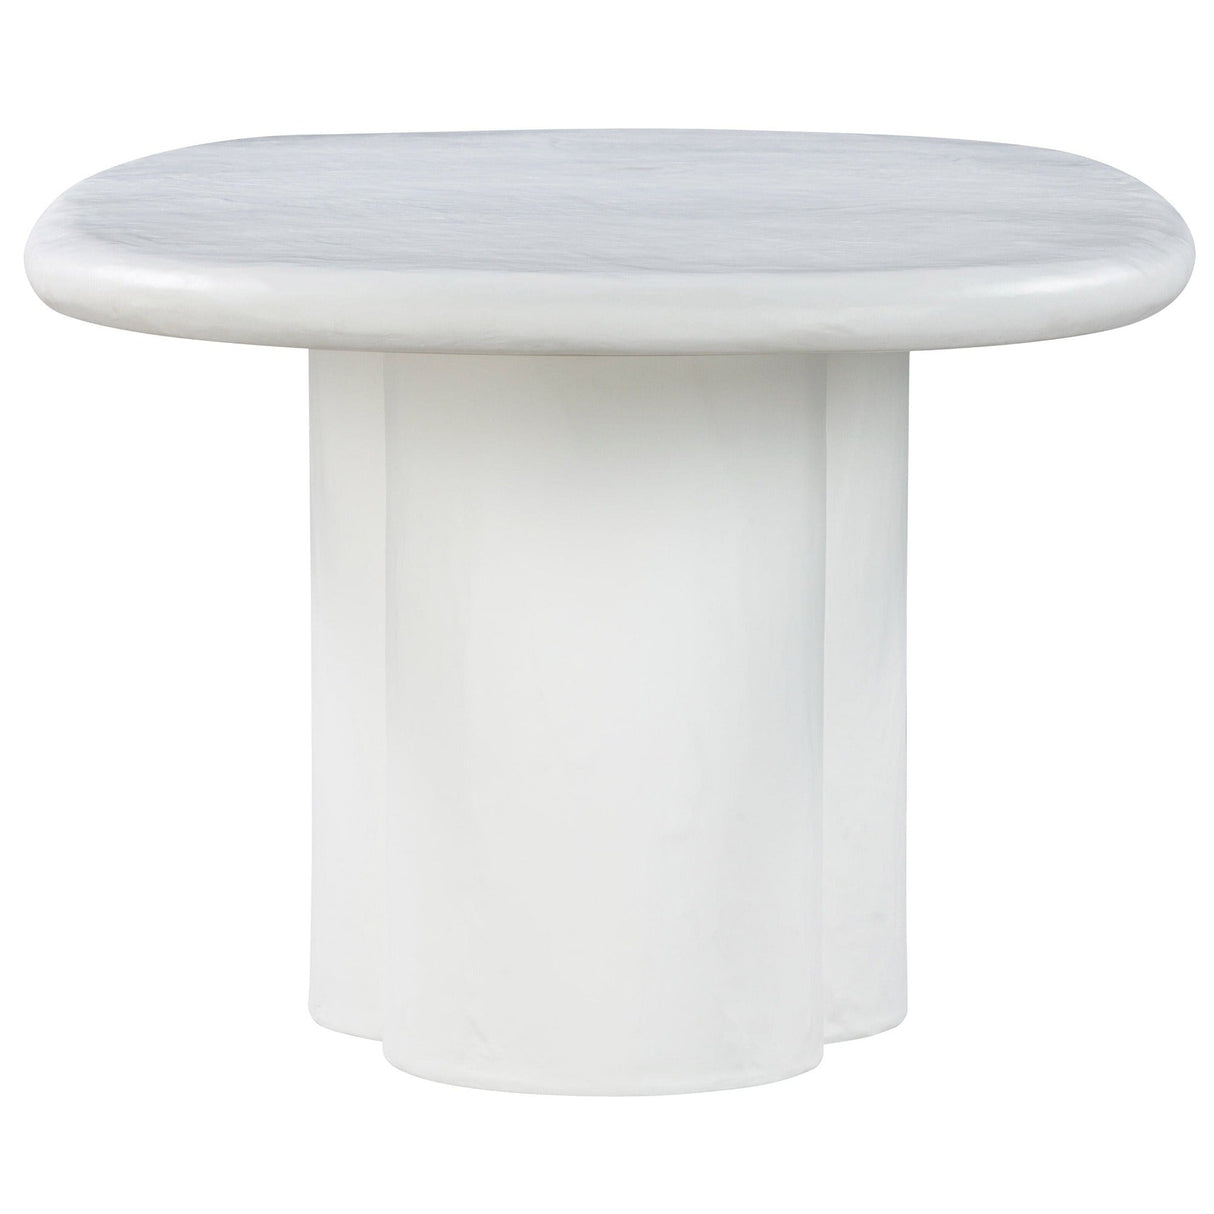 Candelabra Home Elika Faux Plaster Oval Dining Table Dining Tables